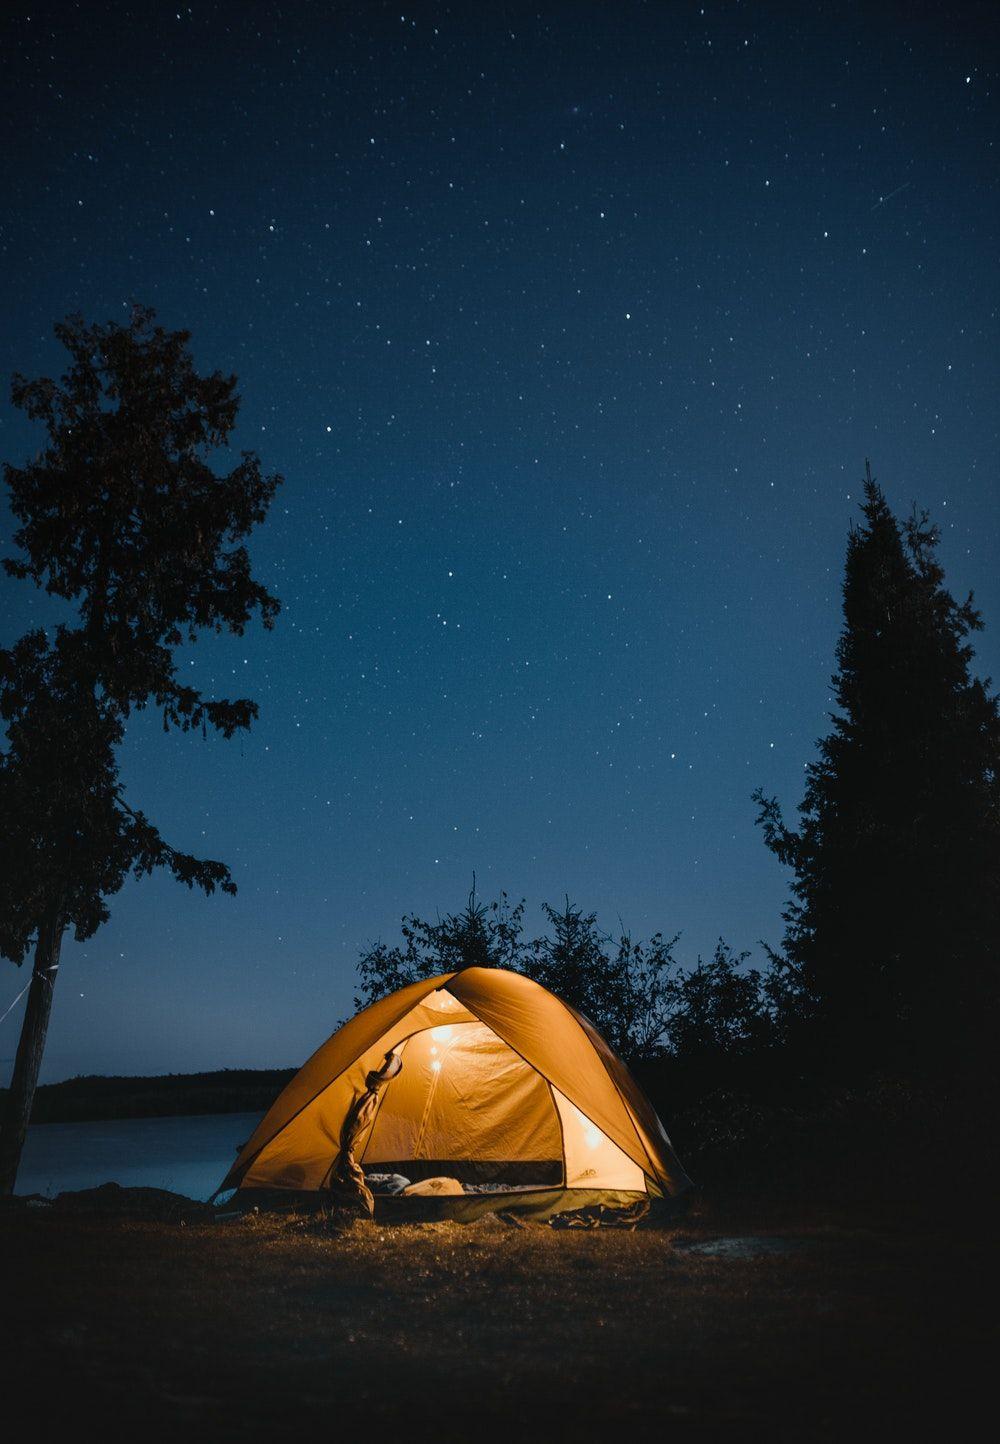 Camping Iphone Wallpapers Top Free Camping Iphone Backgrounds Wallpaperaccess